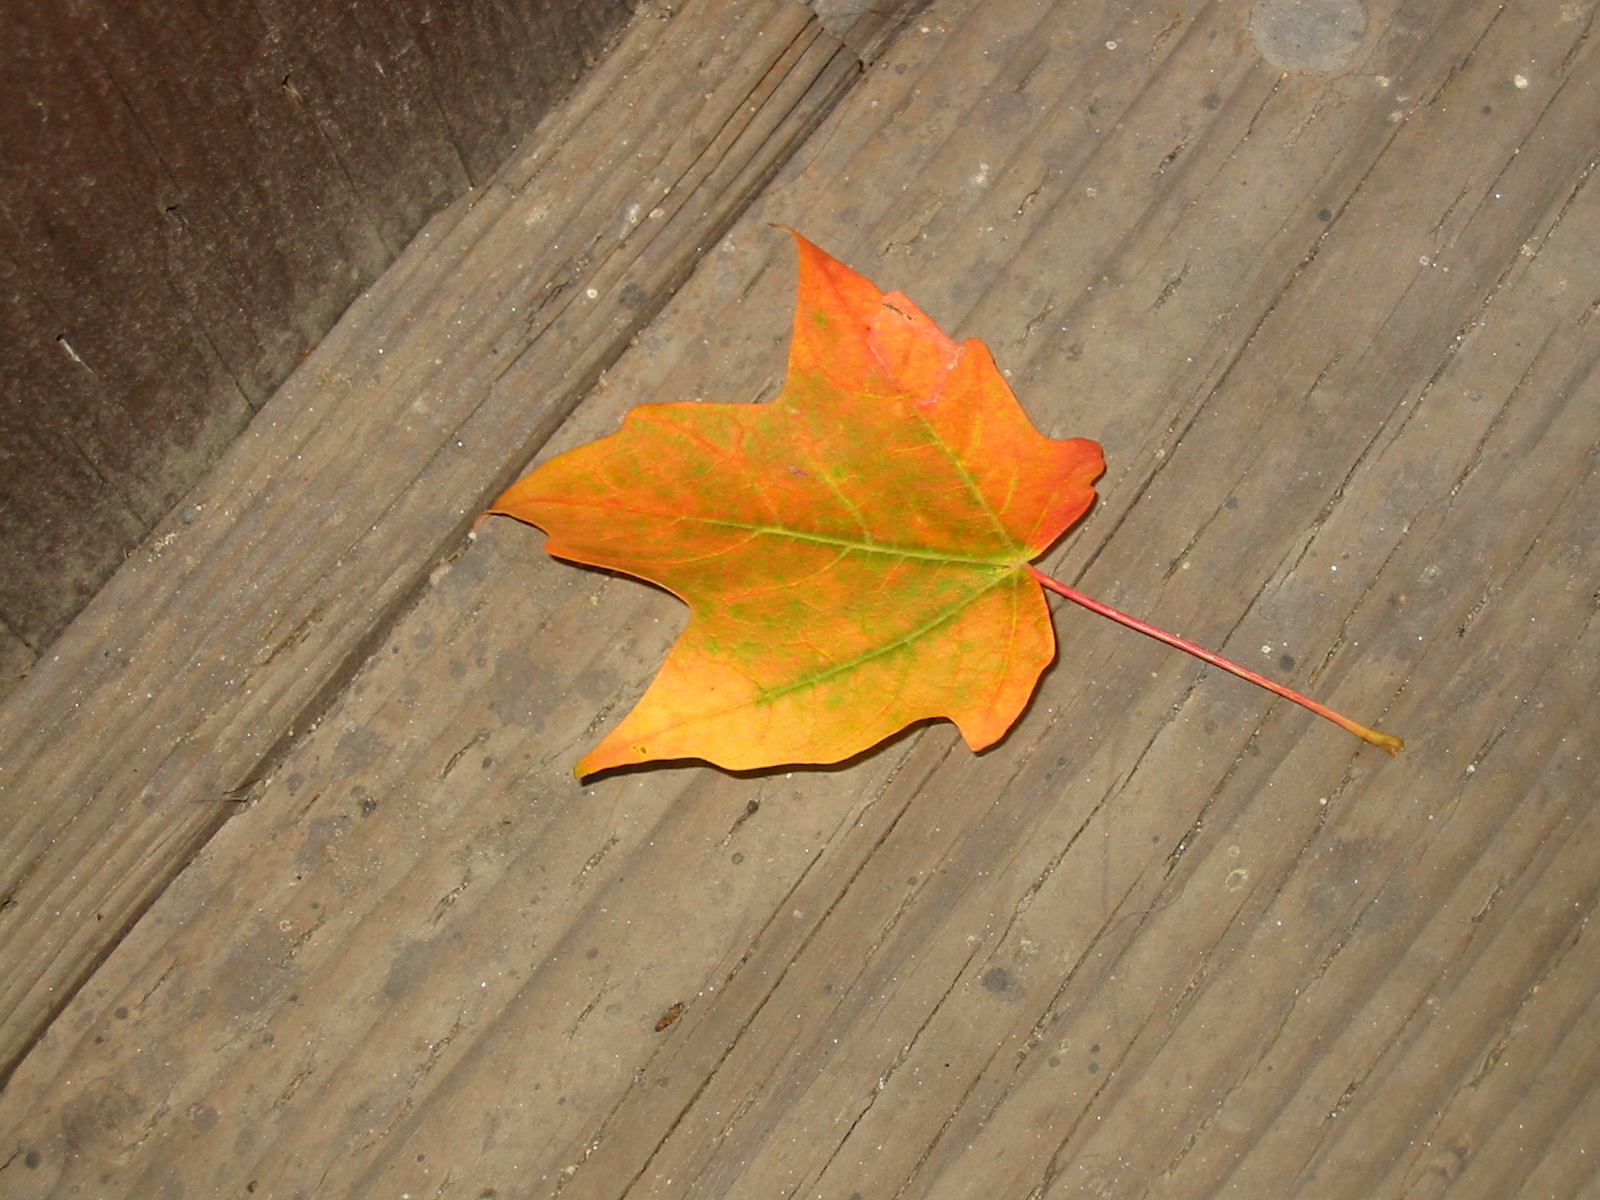 A Leaf (user submitted)